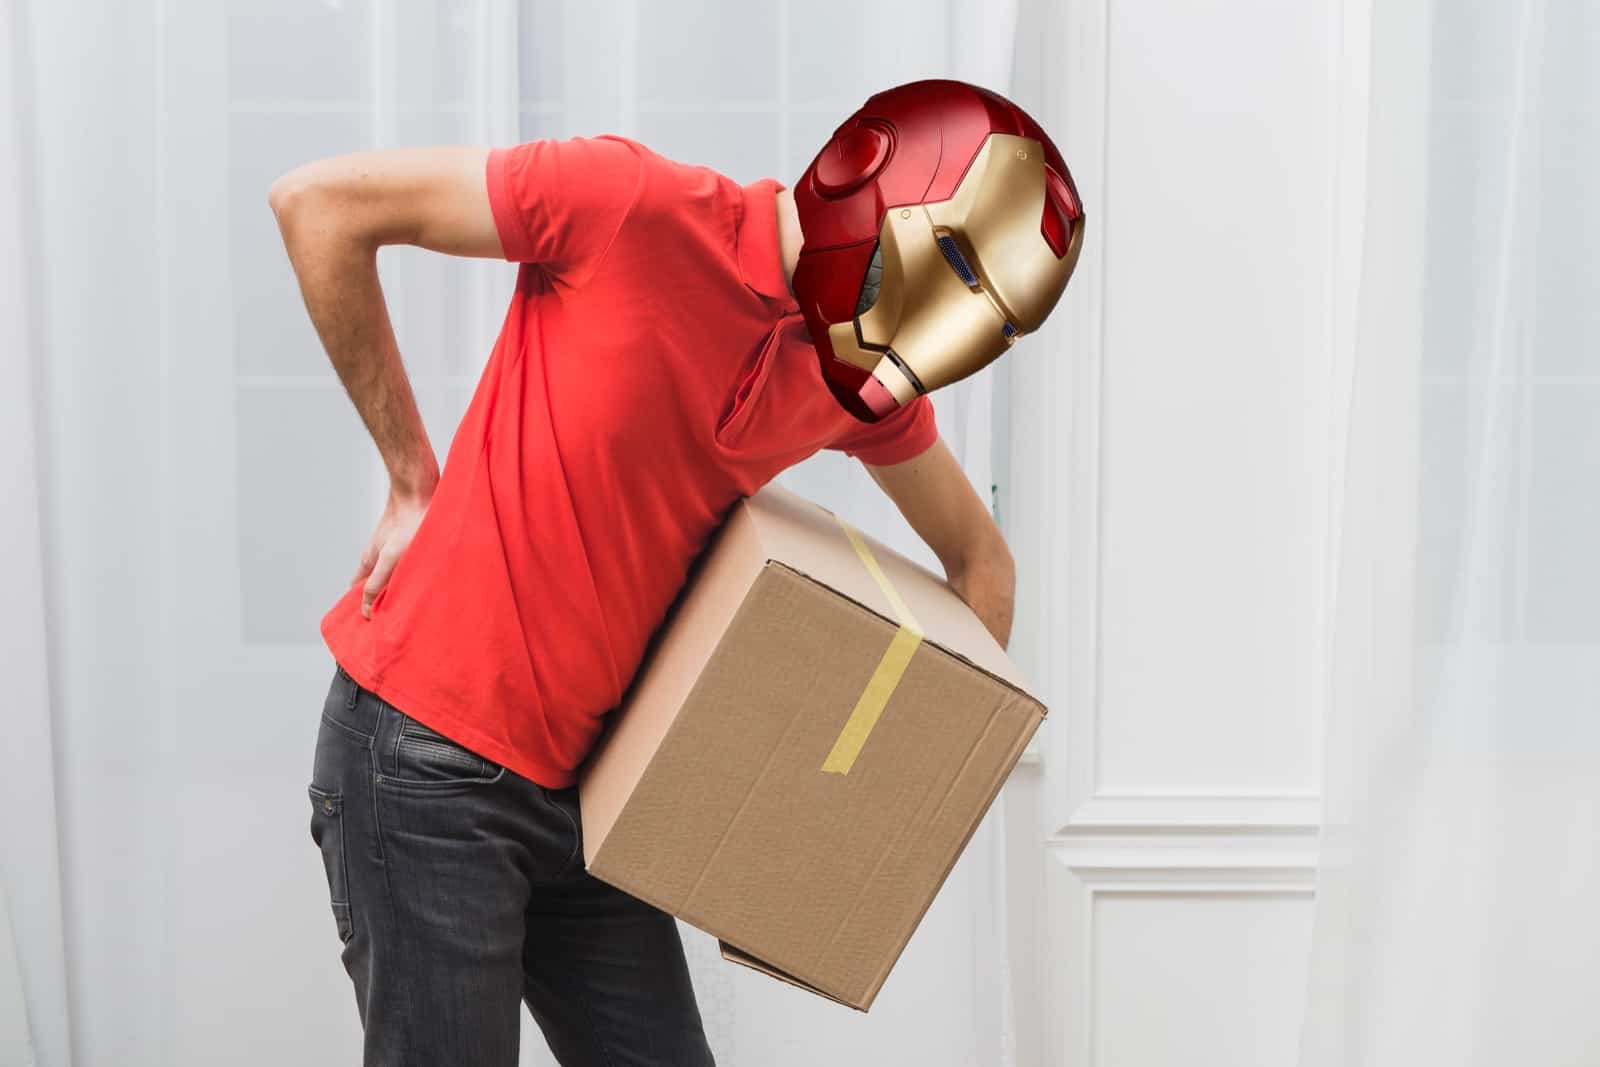 iron man suffering from back pain - How Does Chronic Pain Affects Your Quality of Life in 5 Ways